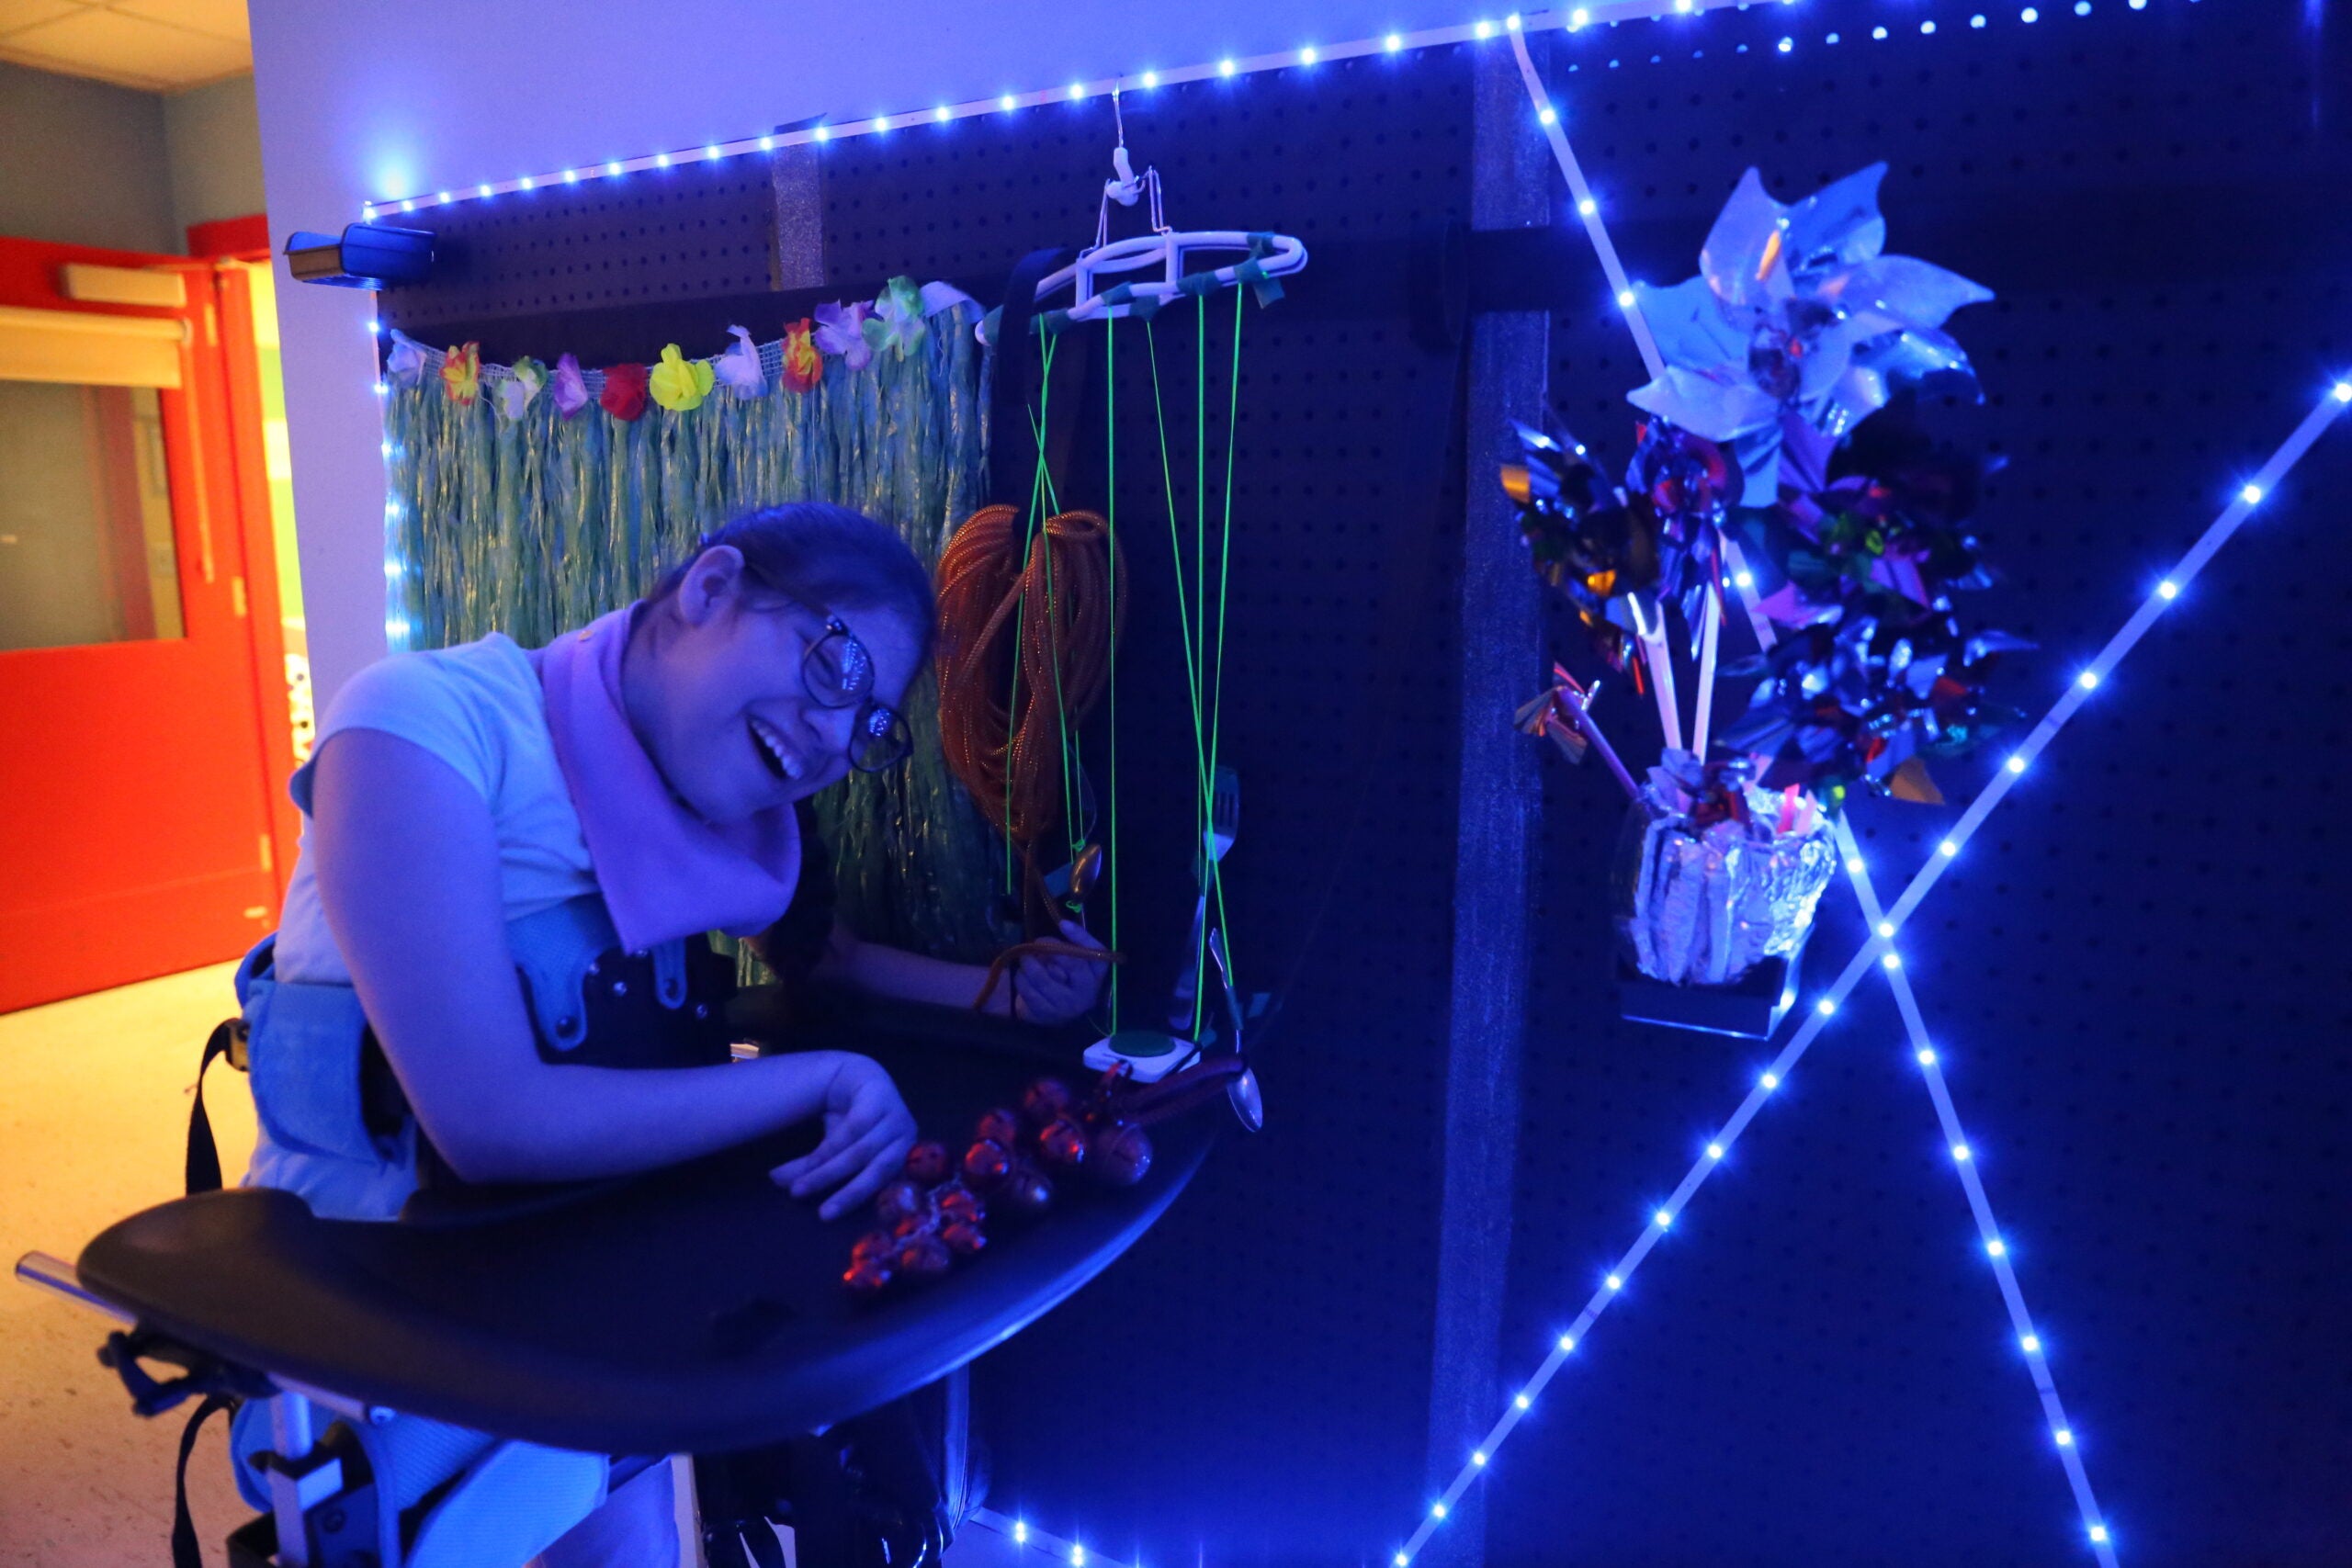 Student with glasses pulling on strings and playing with bells on the sensory wall